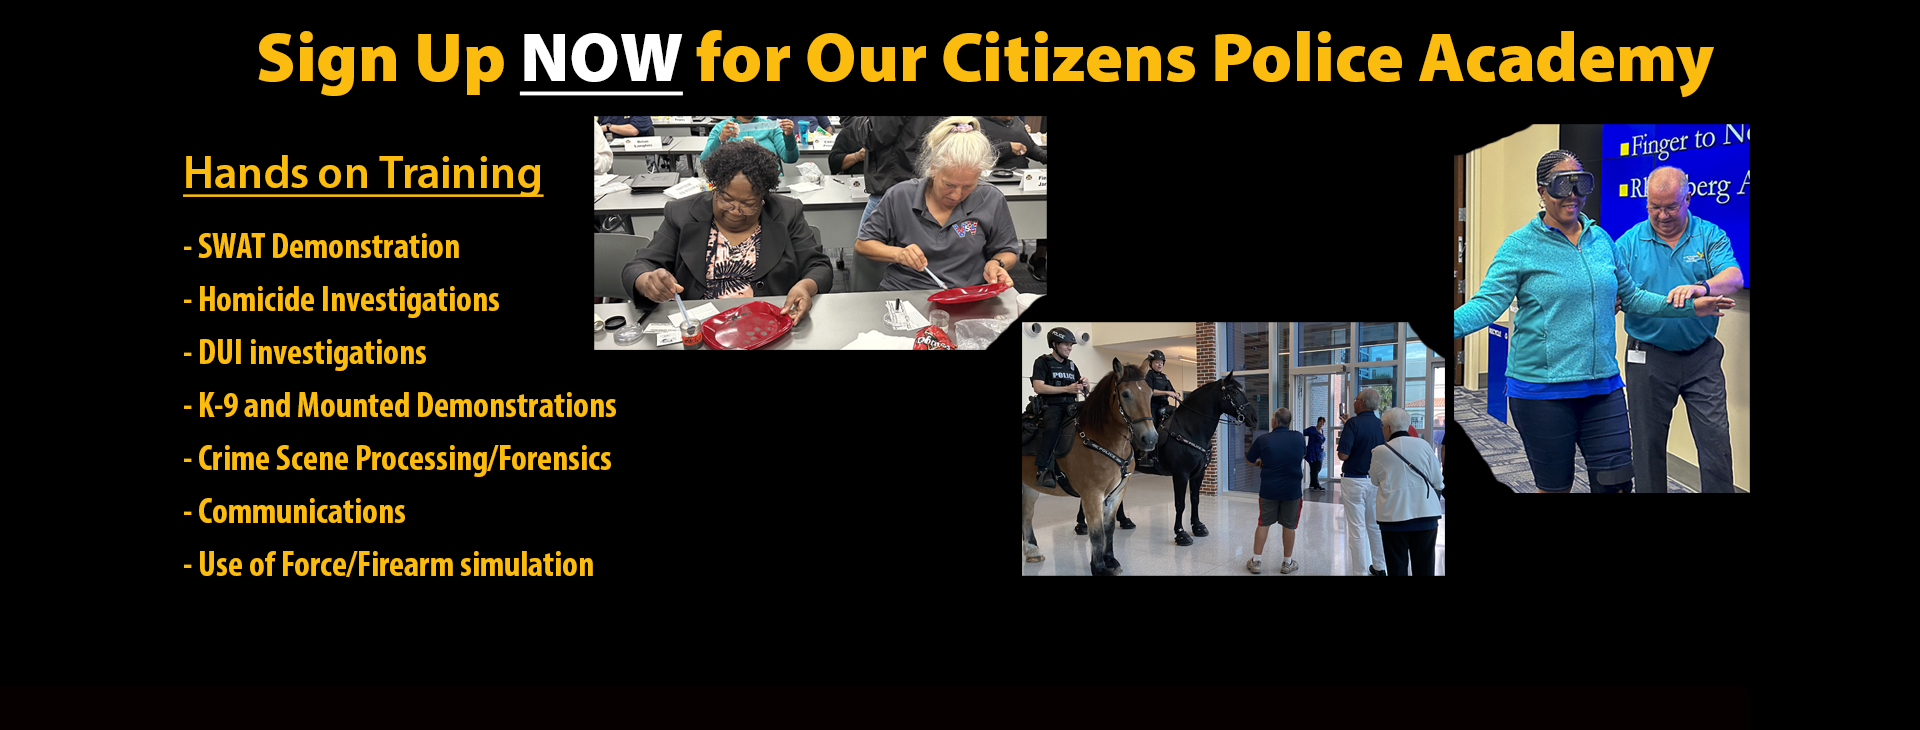 Sign up now for the fall citizens police academy.  Hands on training. SWAT demonstrations, homicide investigations, DUI investigations, K-9 and Mounted units, crime scene processing, communications, use of force and firearm simulation